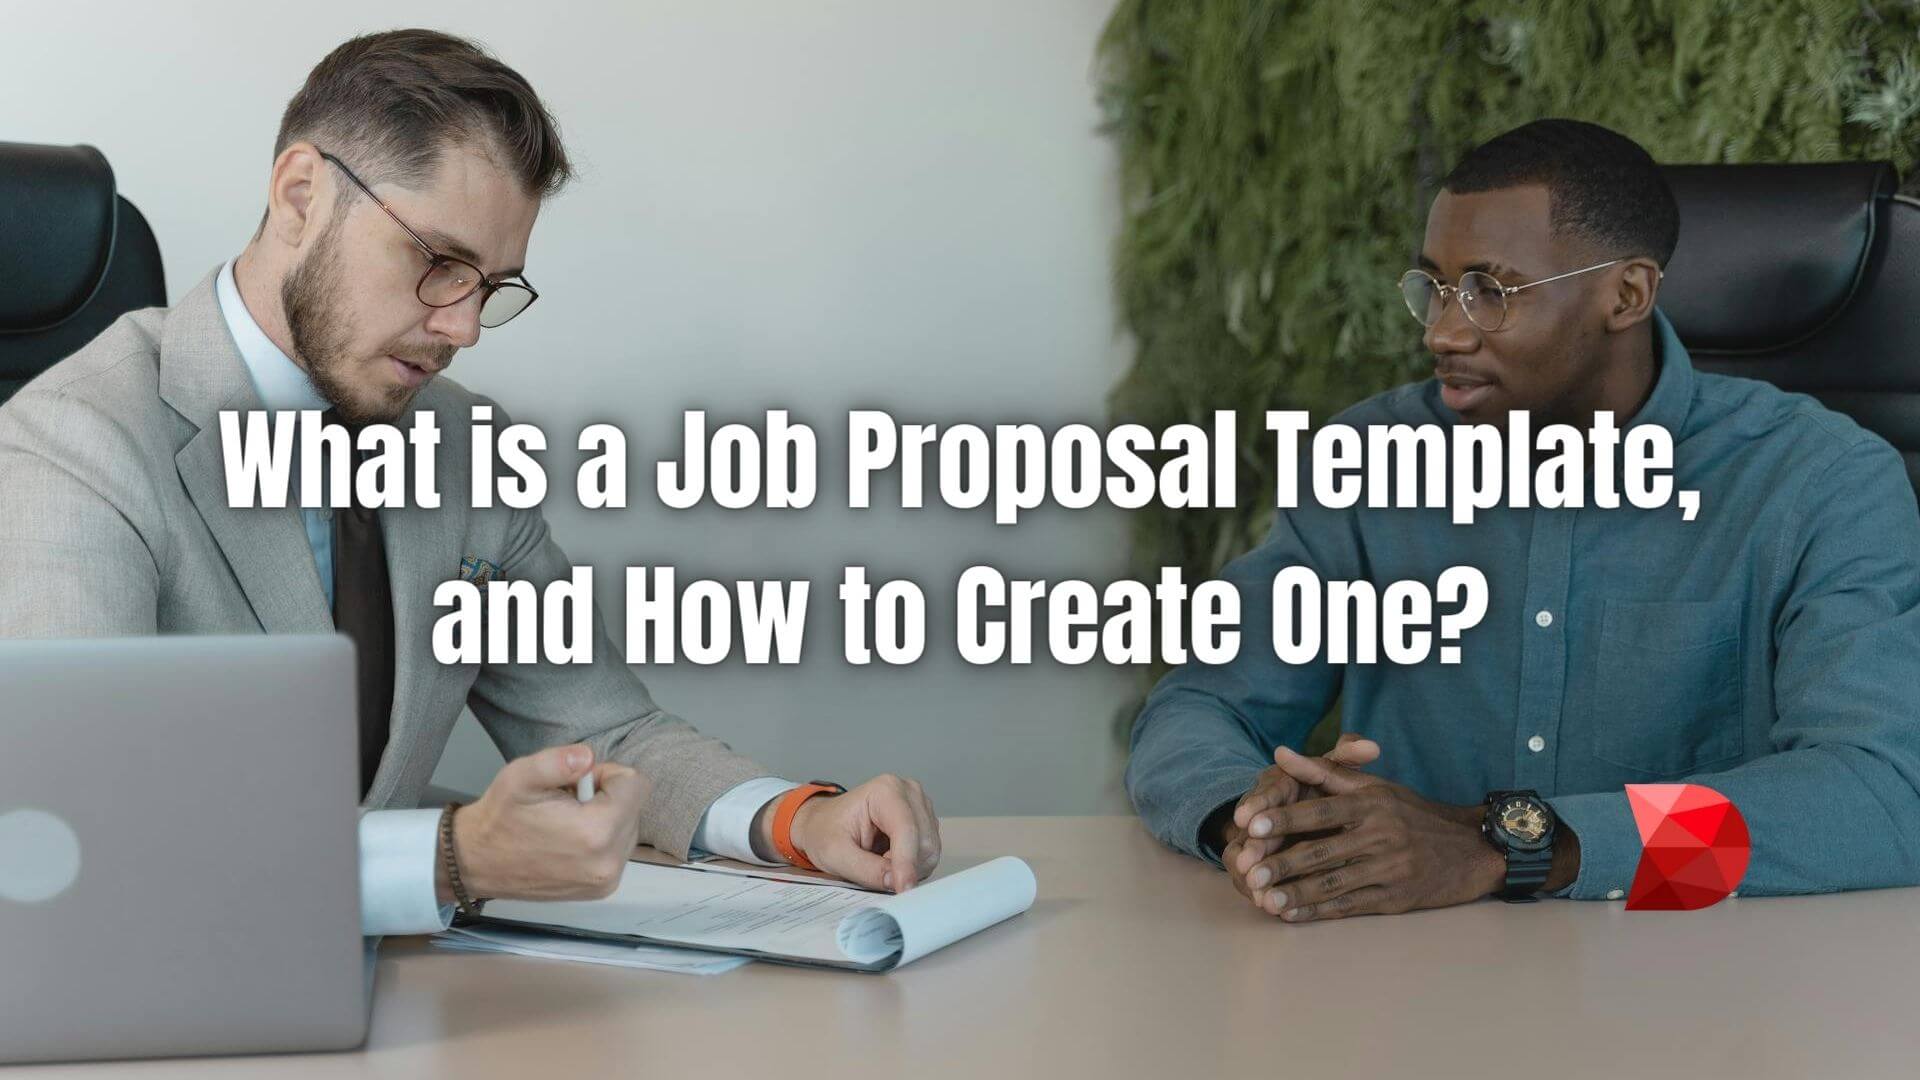 Master the art of creating job proposal templates with our expert guide. Click here to elevate your pitches and win more contracts today!